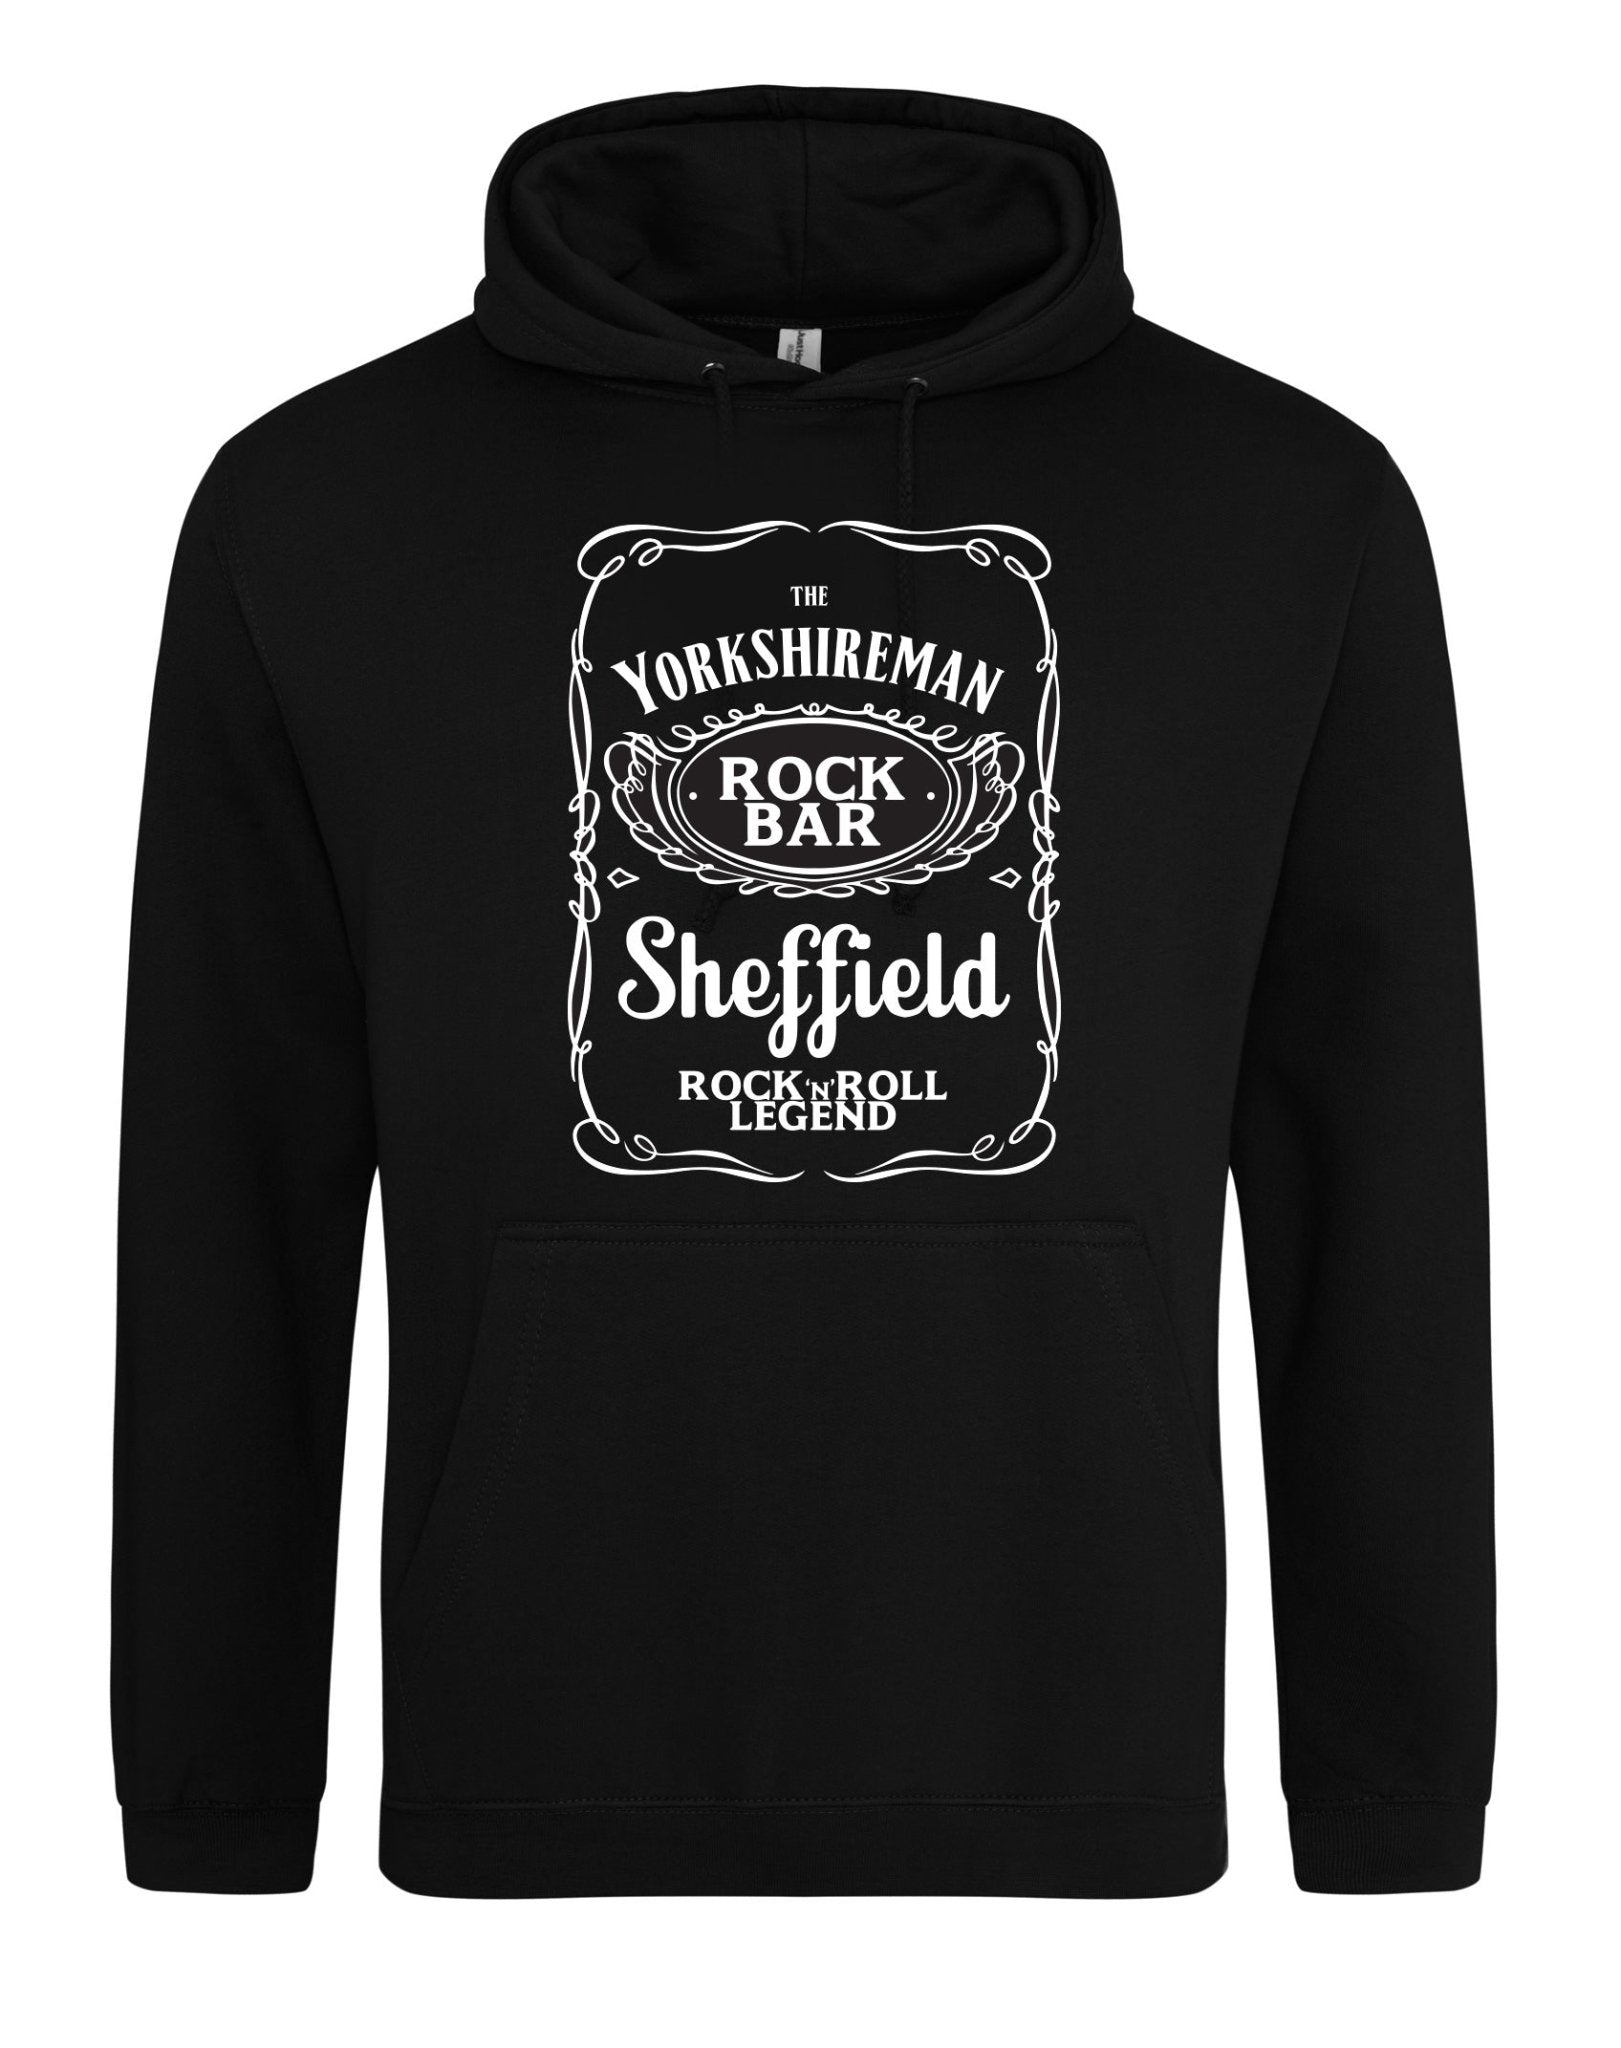 Yorkshireman unisex fit hoodie - various colours - Dirty Stop Outs